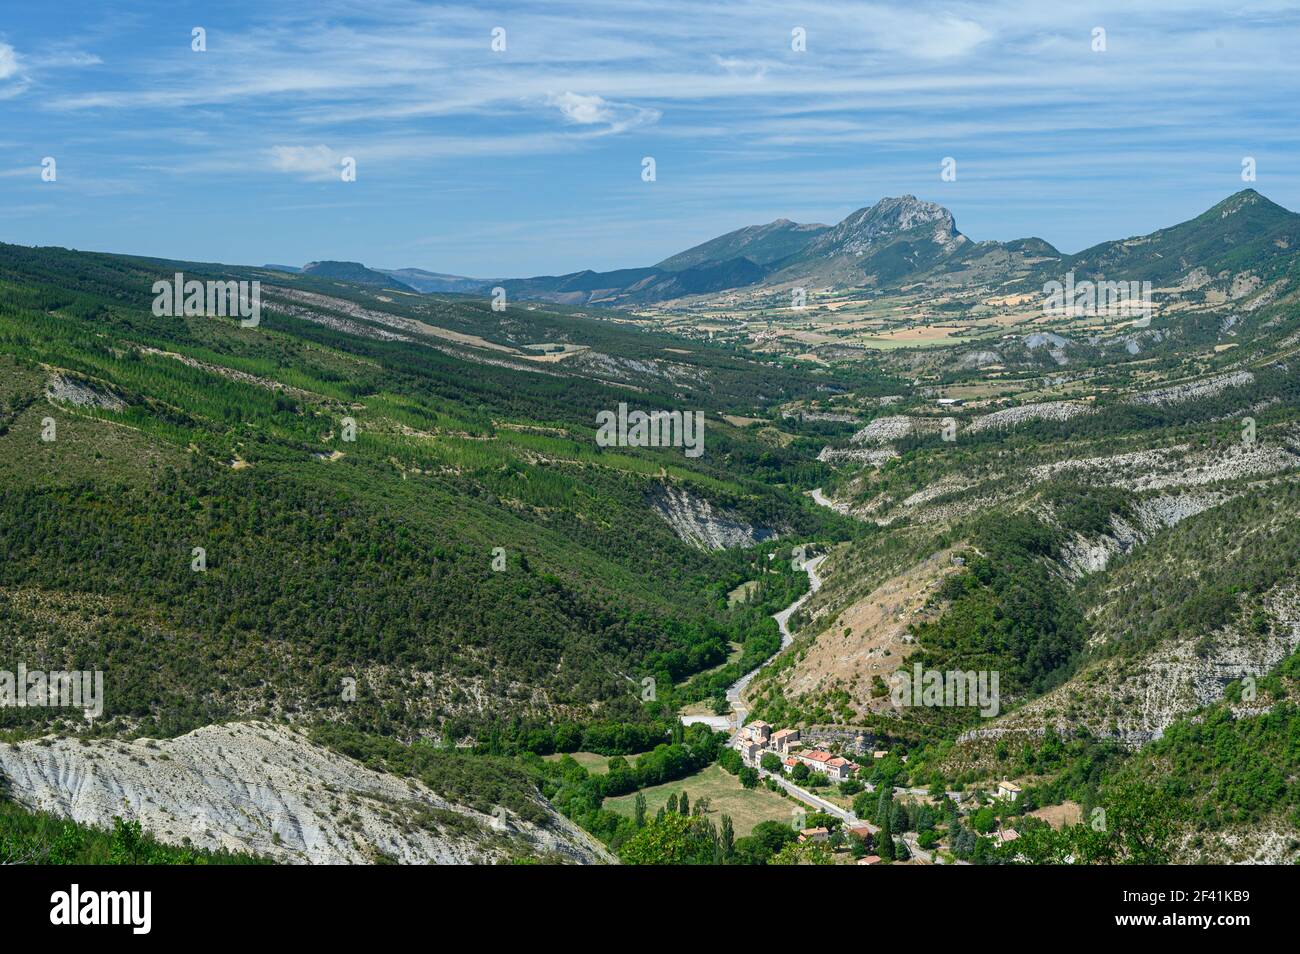 Aerial panoramic view of a green valley surrounded by tall mountains near Annecy, France. Stock Photo